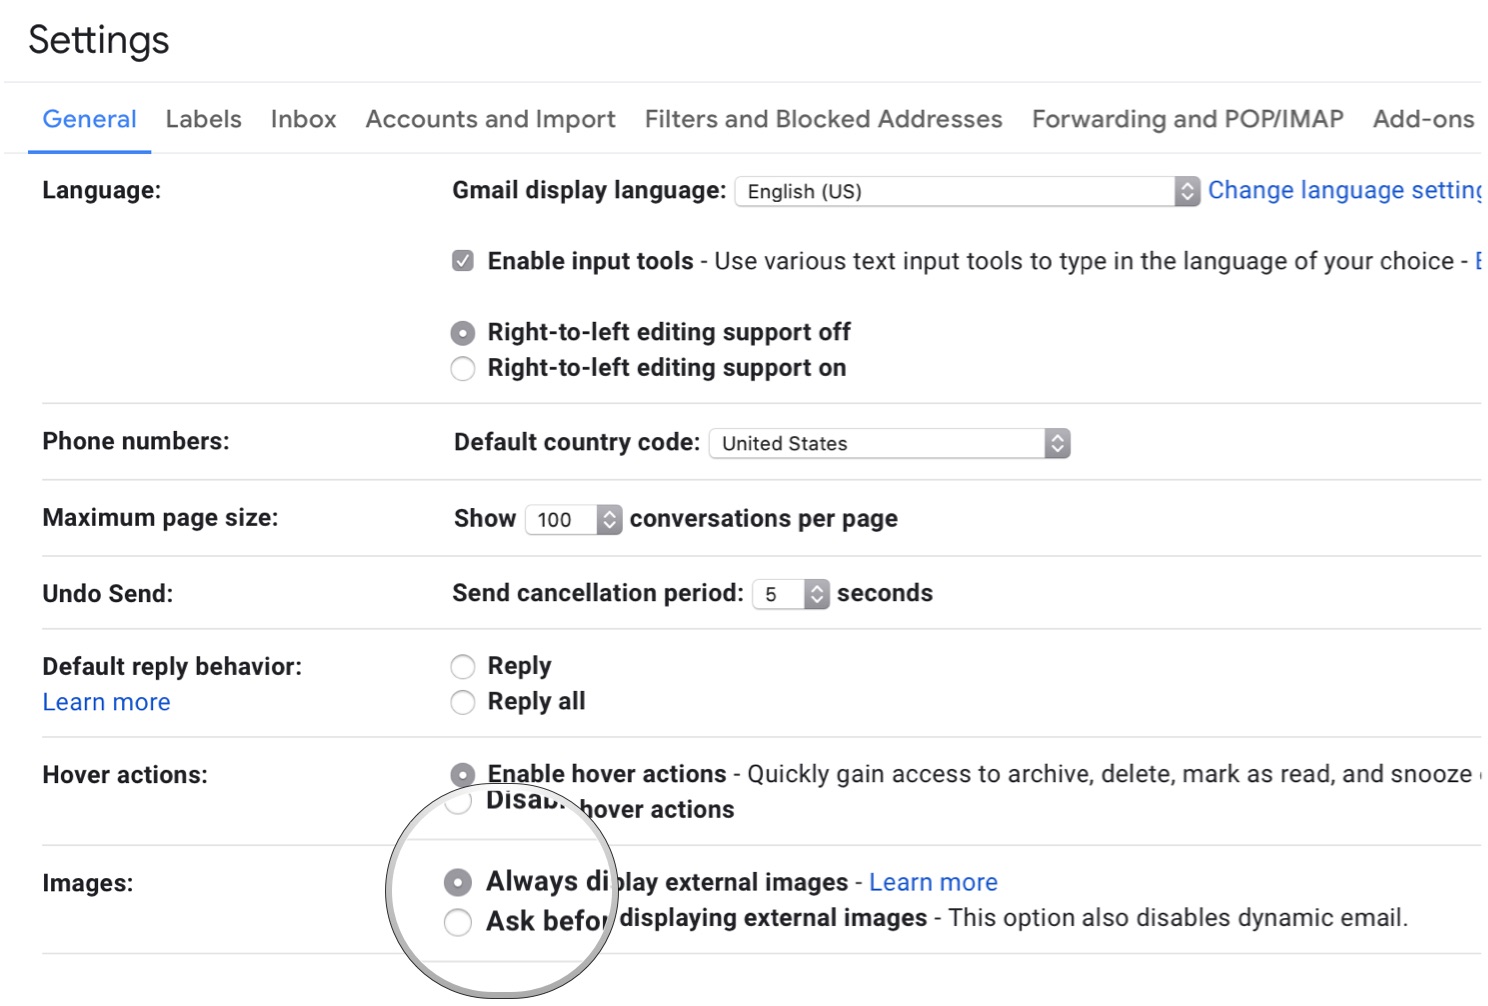 How to disable image loading in Gmail by showing steps: Under Images section, click Always display external images